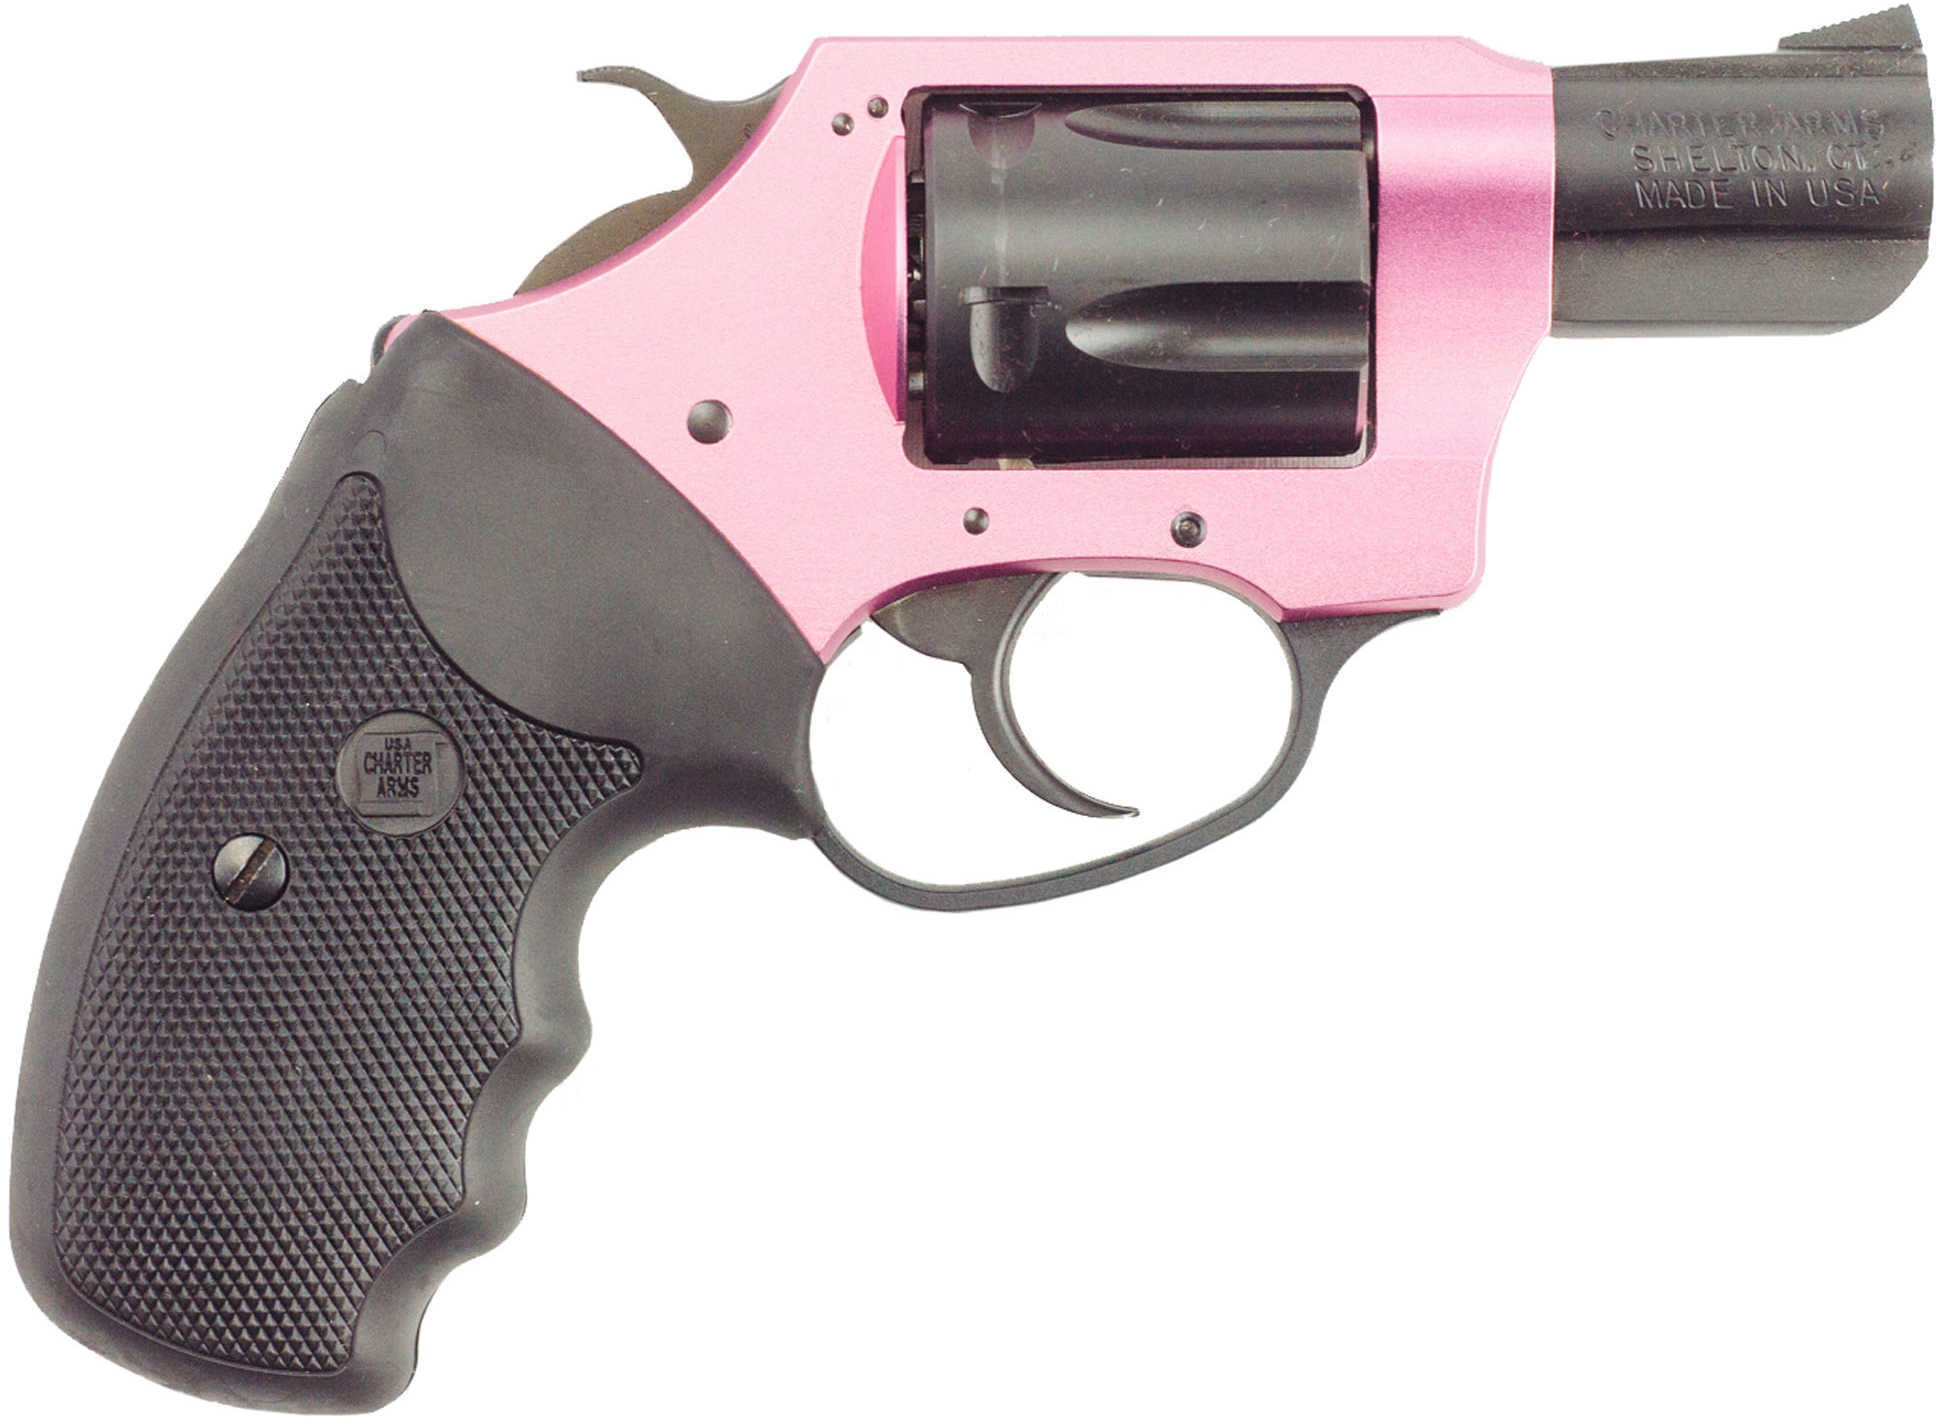 Charter Arms 38 Special Pink Lady 2" Barrel Pink/ Black Fixed Sight 5 Round Revolver 53835